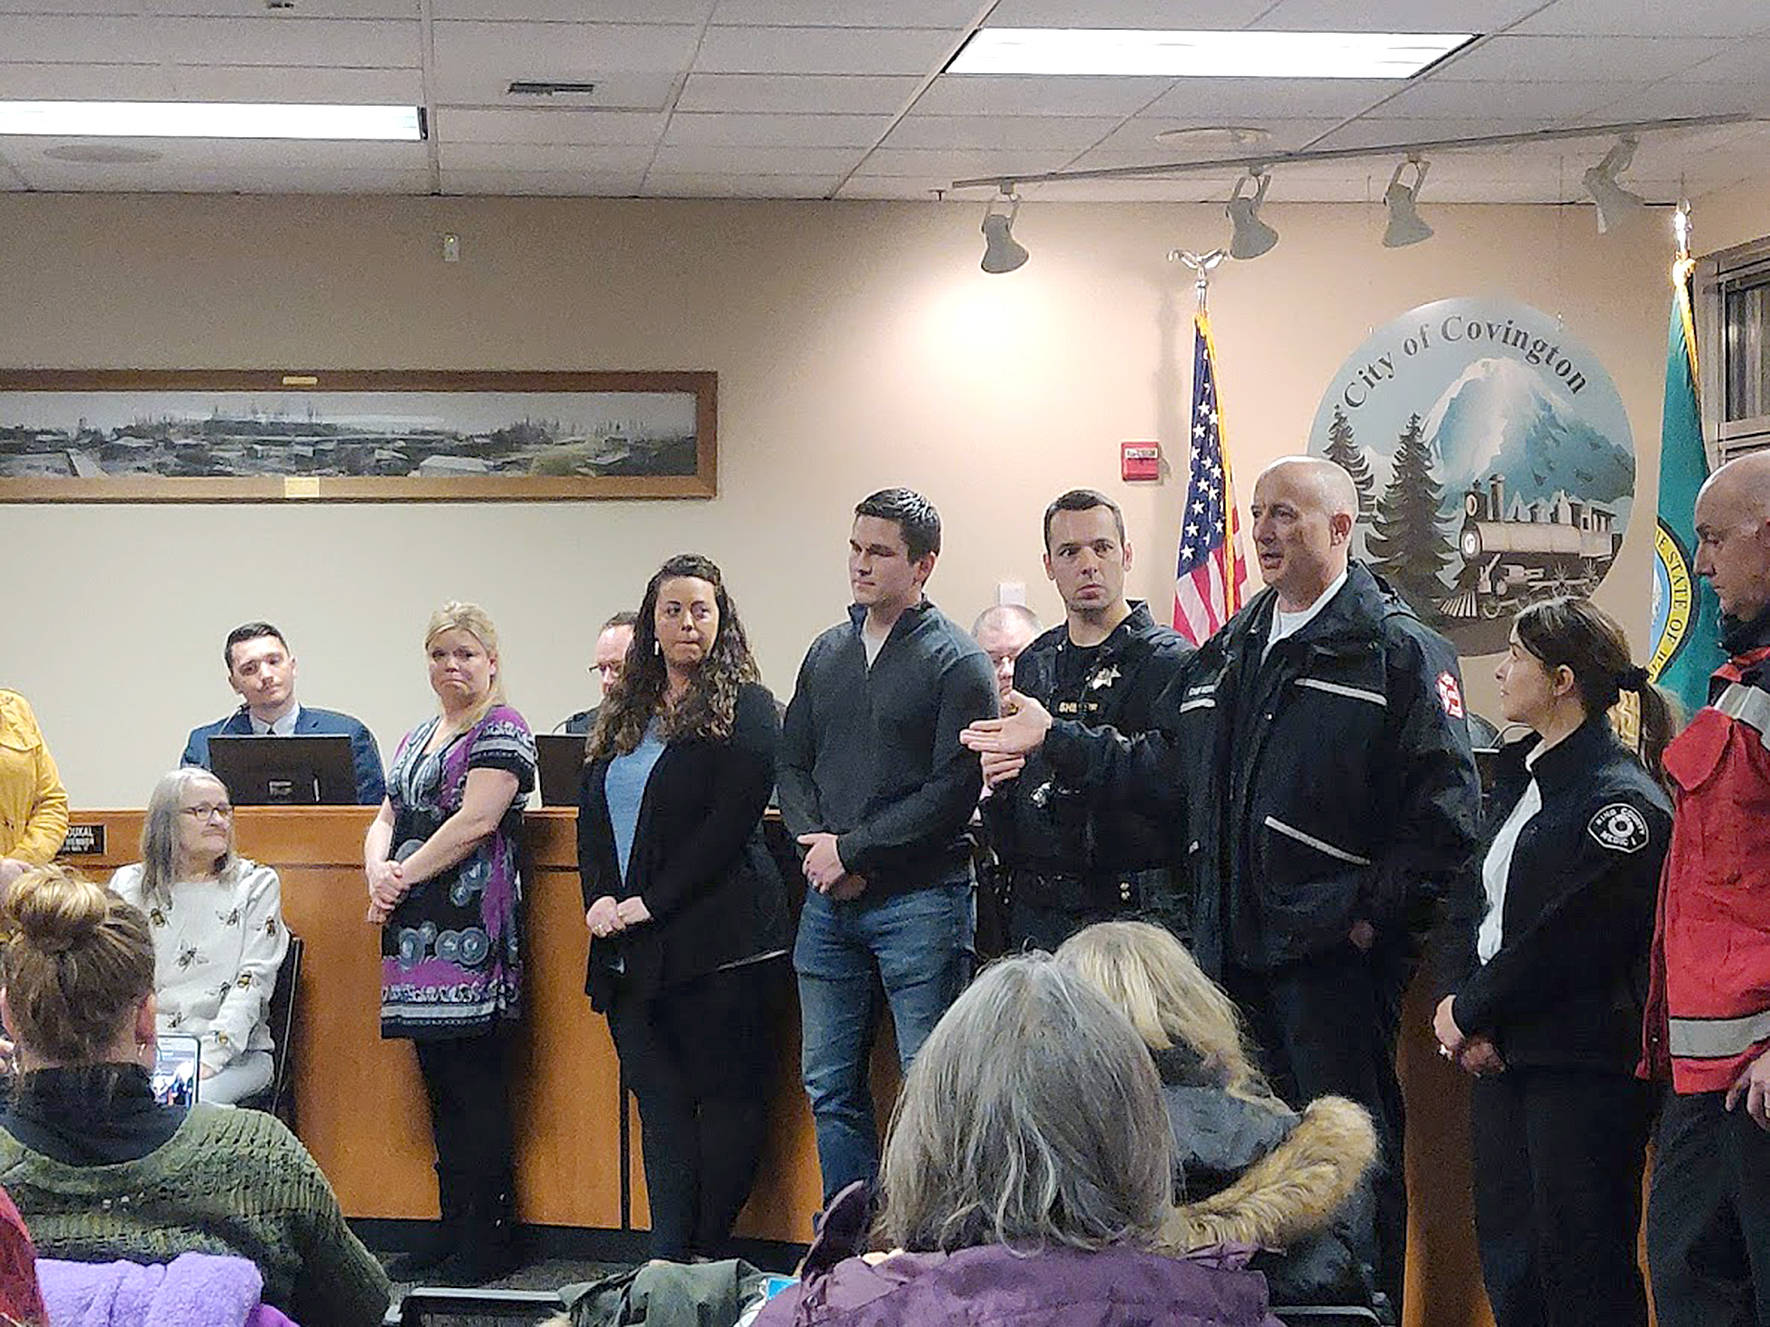 A large group of audience members and honorees listed to Puget Sound Regional Fire Authority Captain Joe Root speak about how CPR can save a person’s life during an emergency during the regular Covington City Council meeting on Monday, Jan. 27, 2020. Photo by Danielle Chastaine.